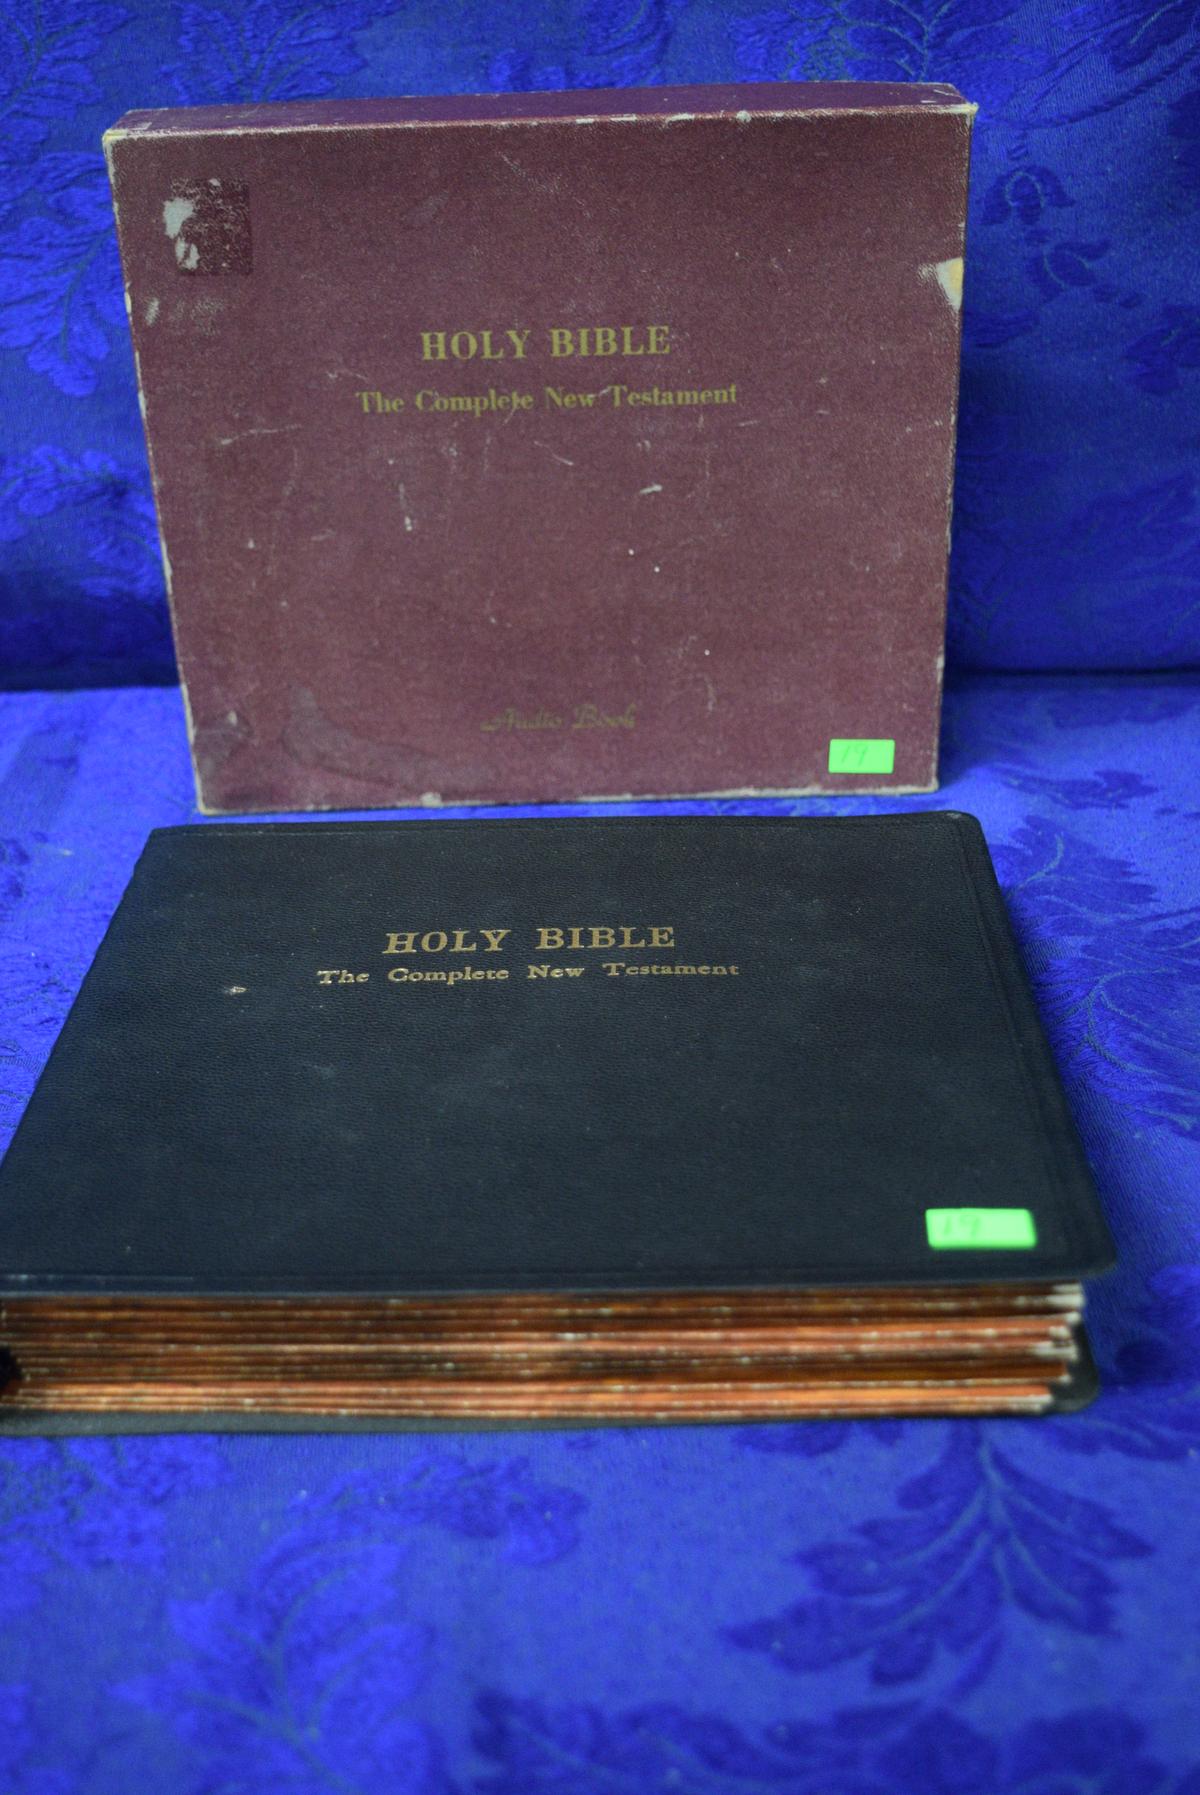 VINTAGE COLLECTION OF THE HOLY BIBLE ON AUDIO!